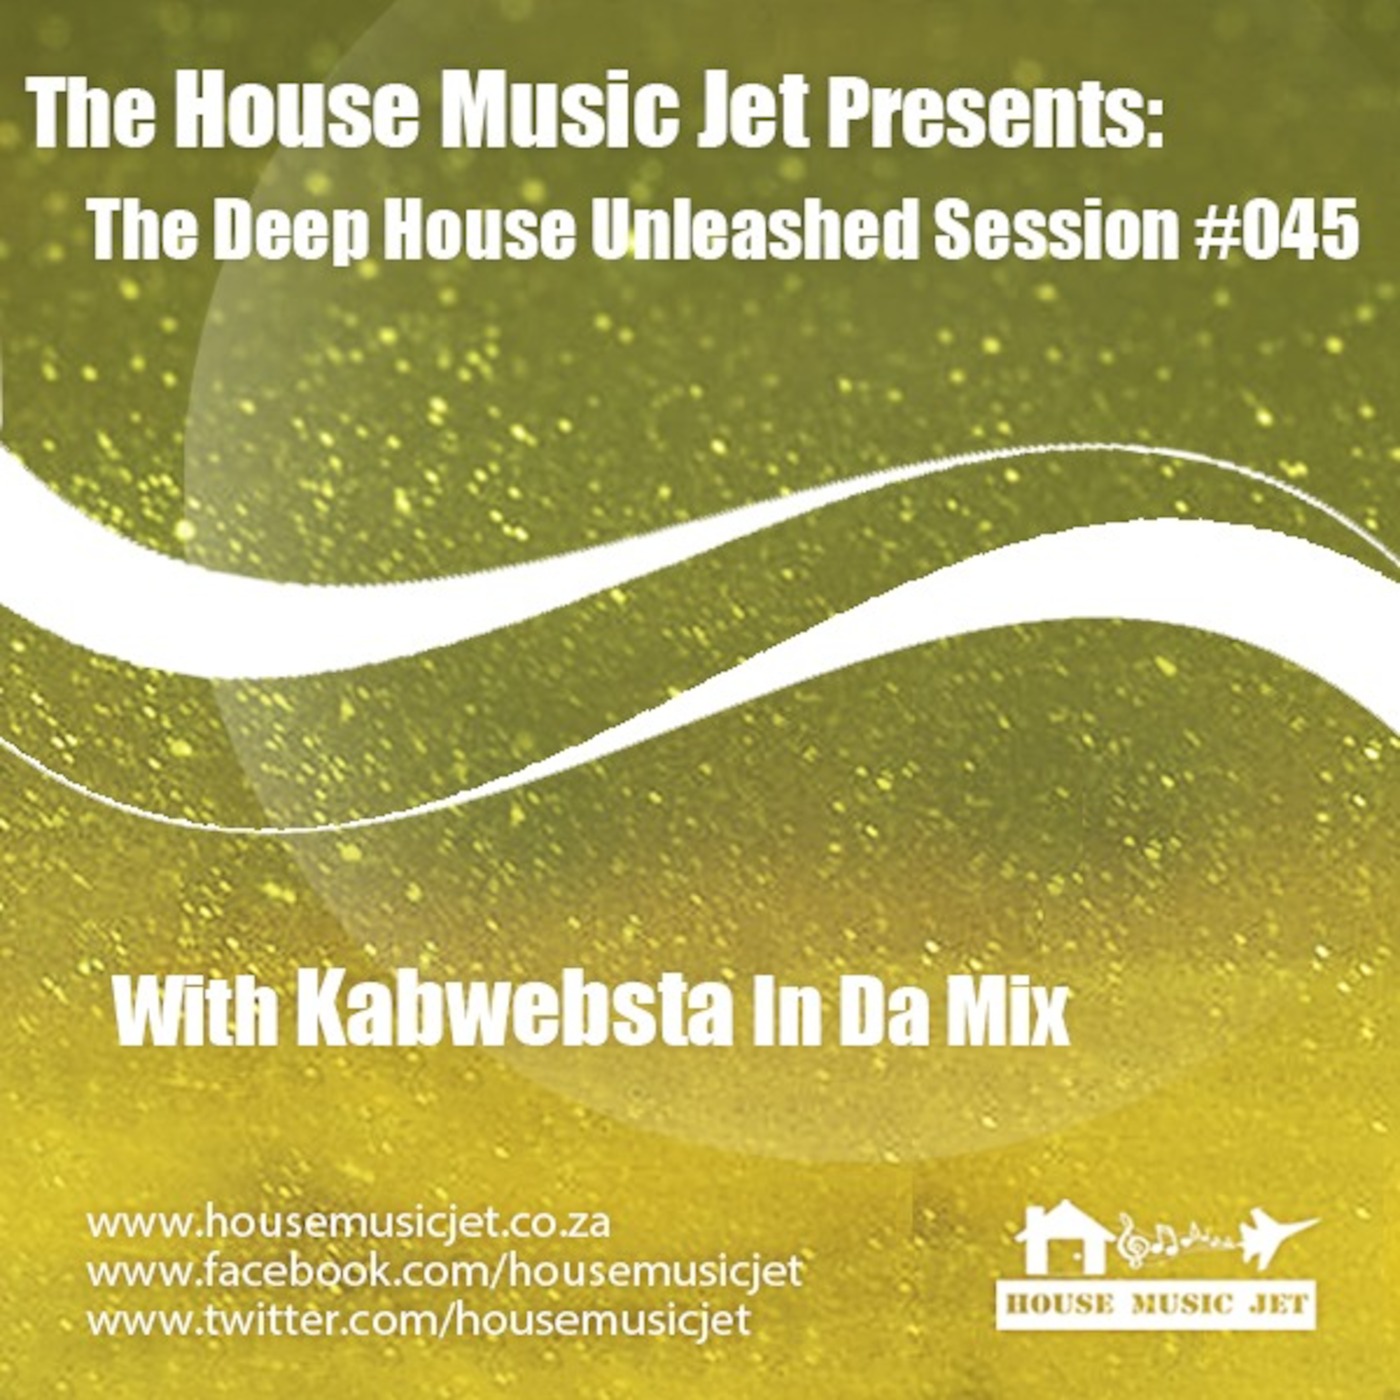 Kabwebsta In Da Mix – Deep House Unleashed Session 45